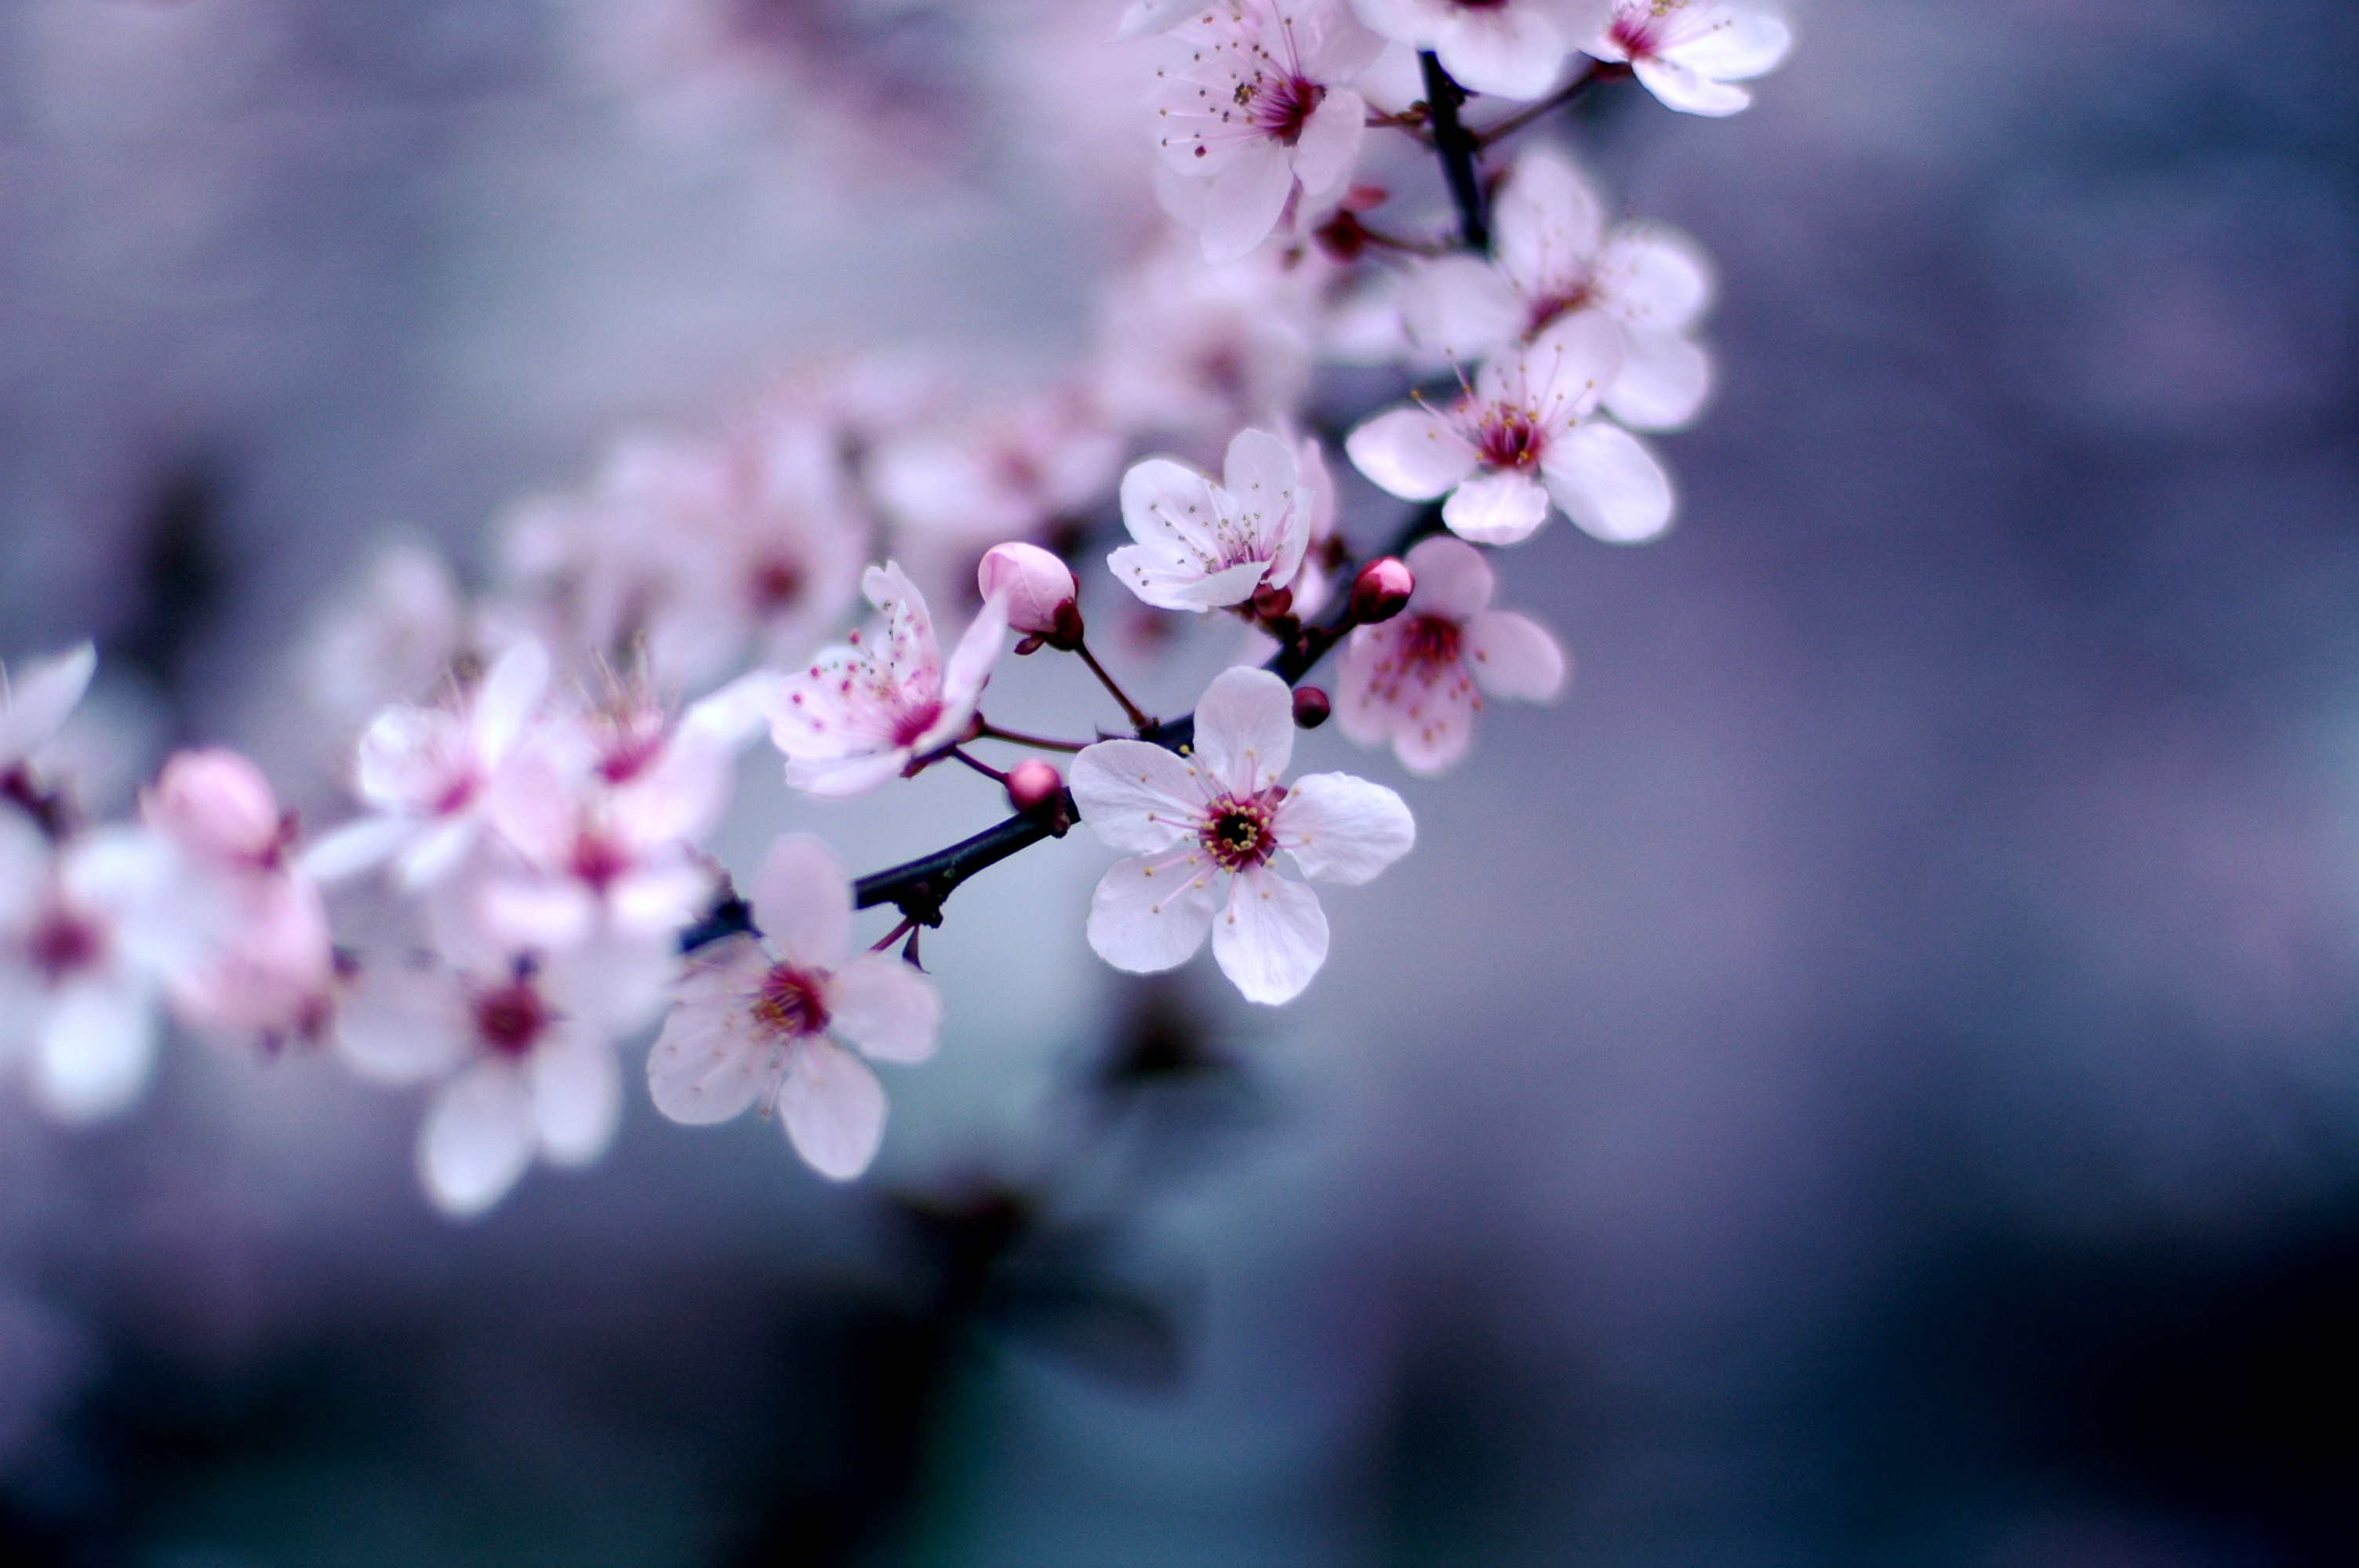 a close up of delicate, pink cherry blossoms on a branch